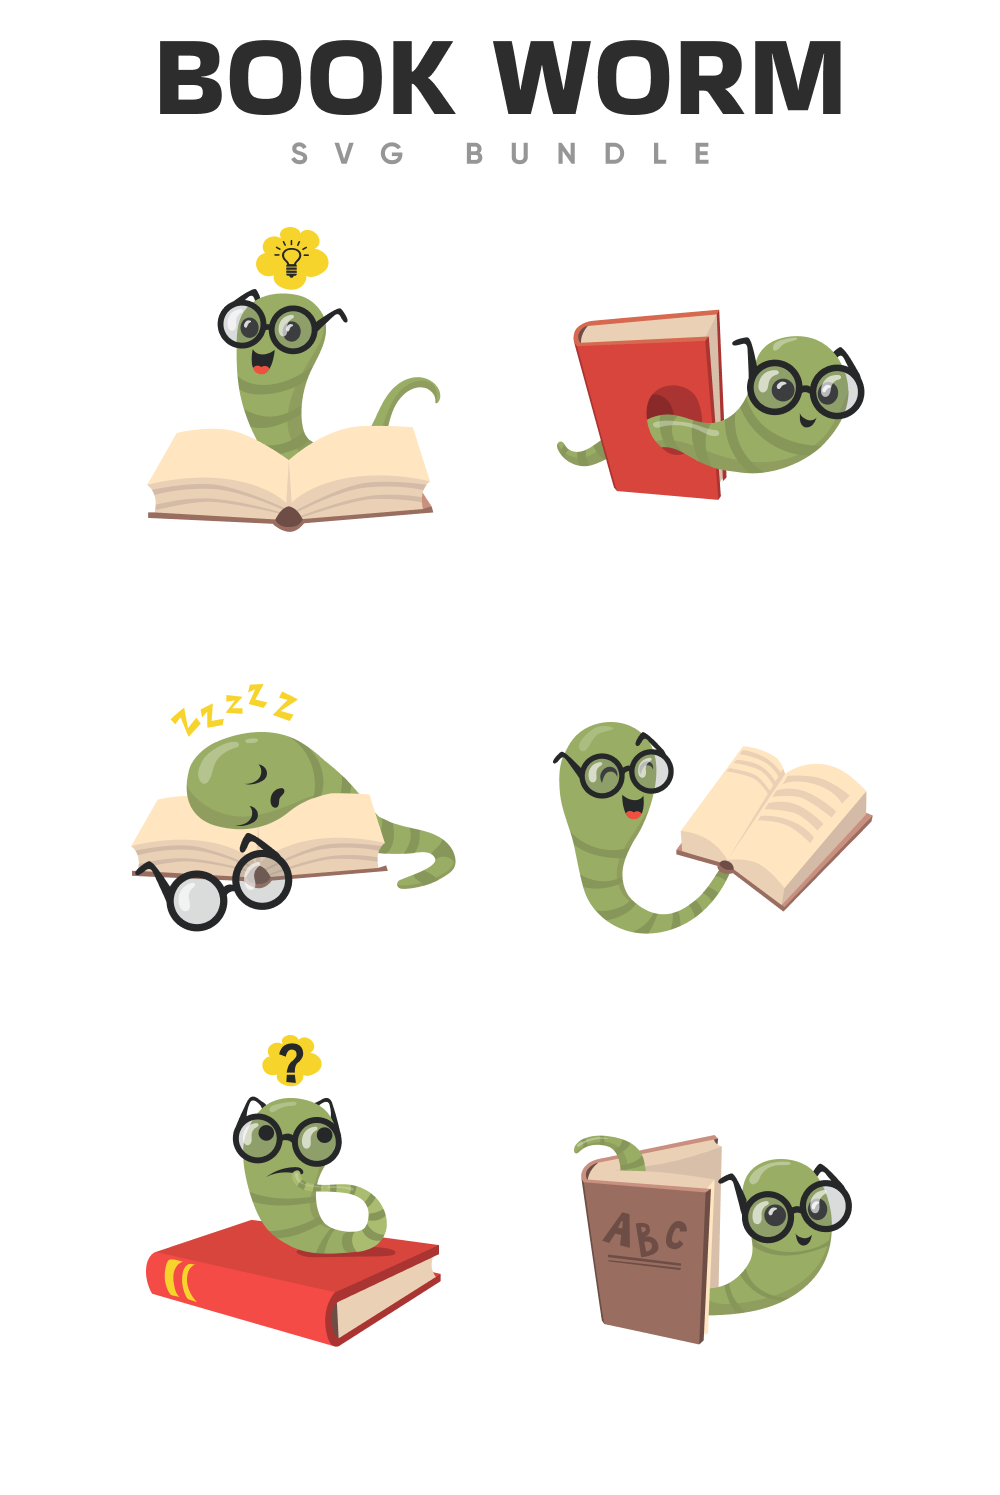 A collage of images of drawn books with a drawn worm with glasses.